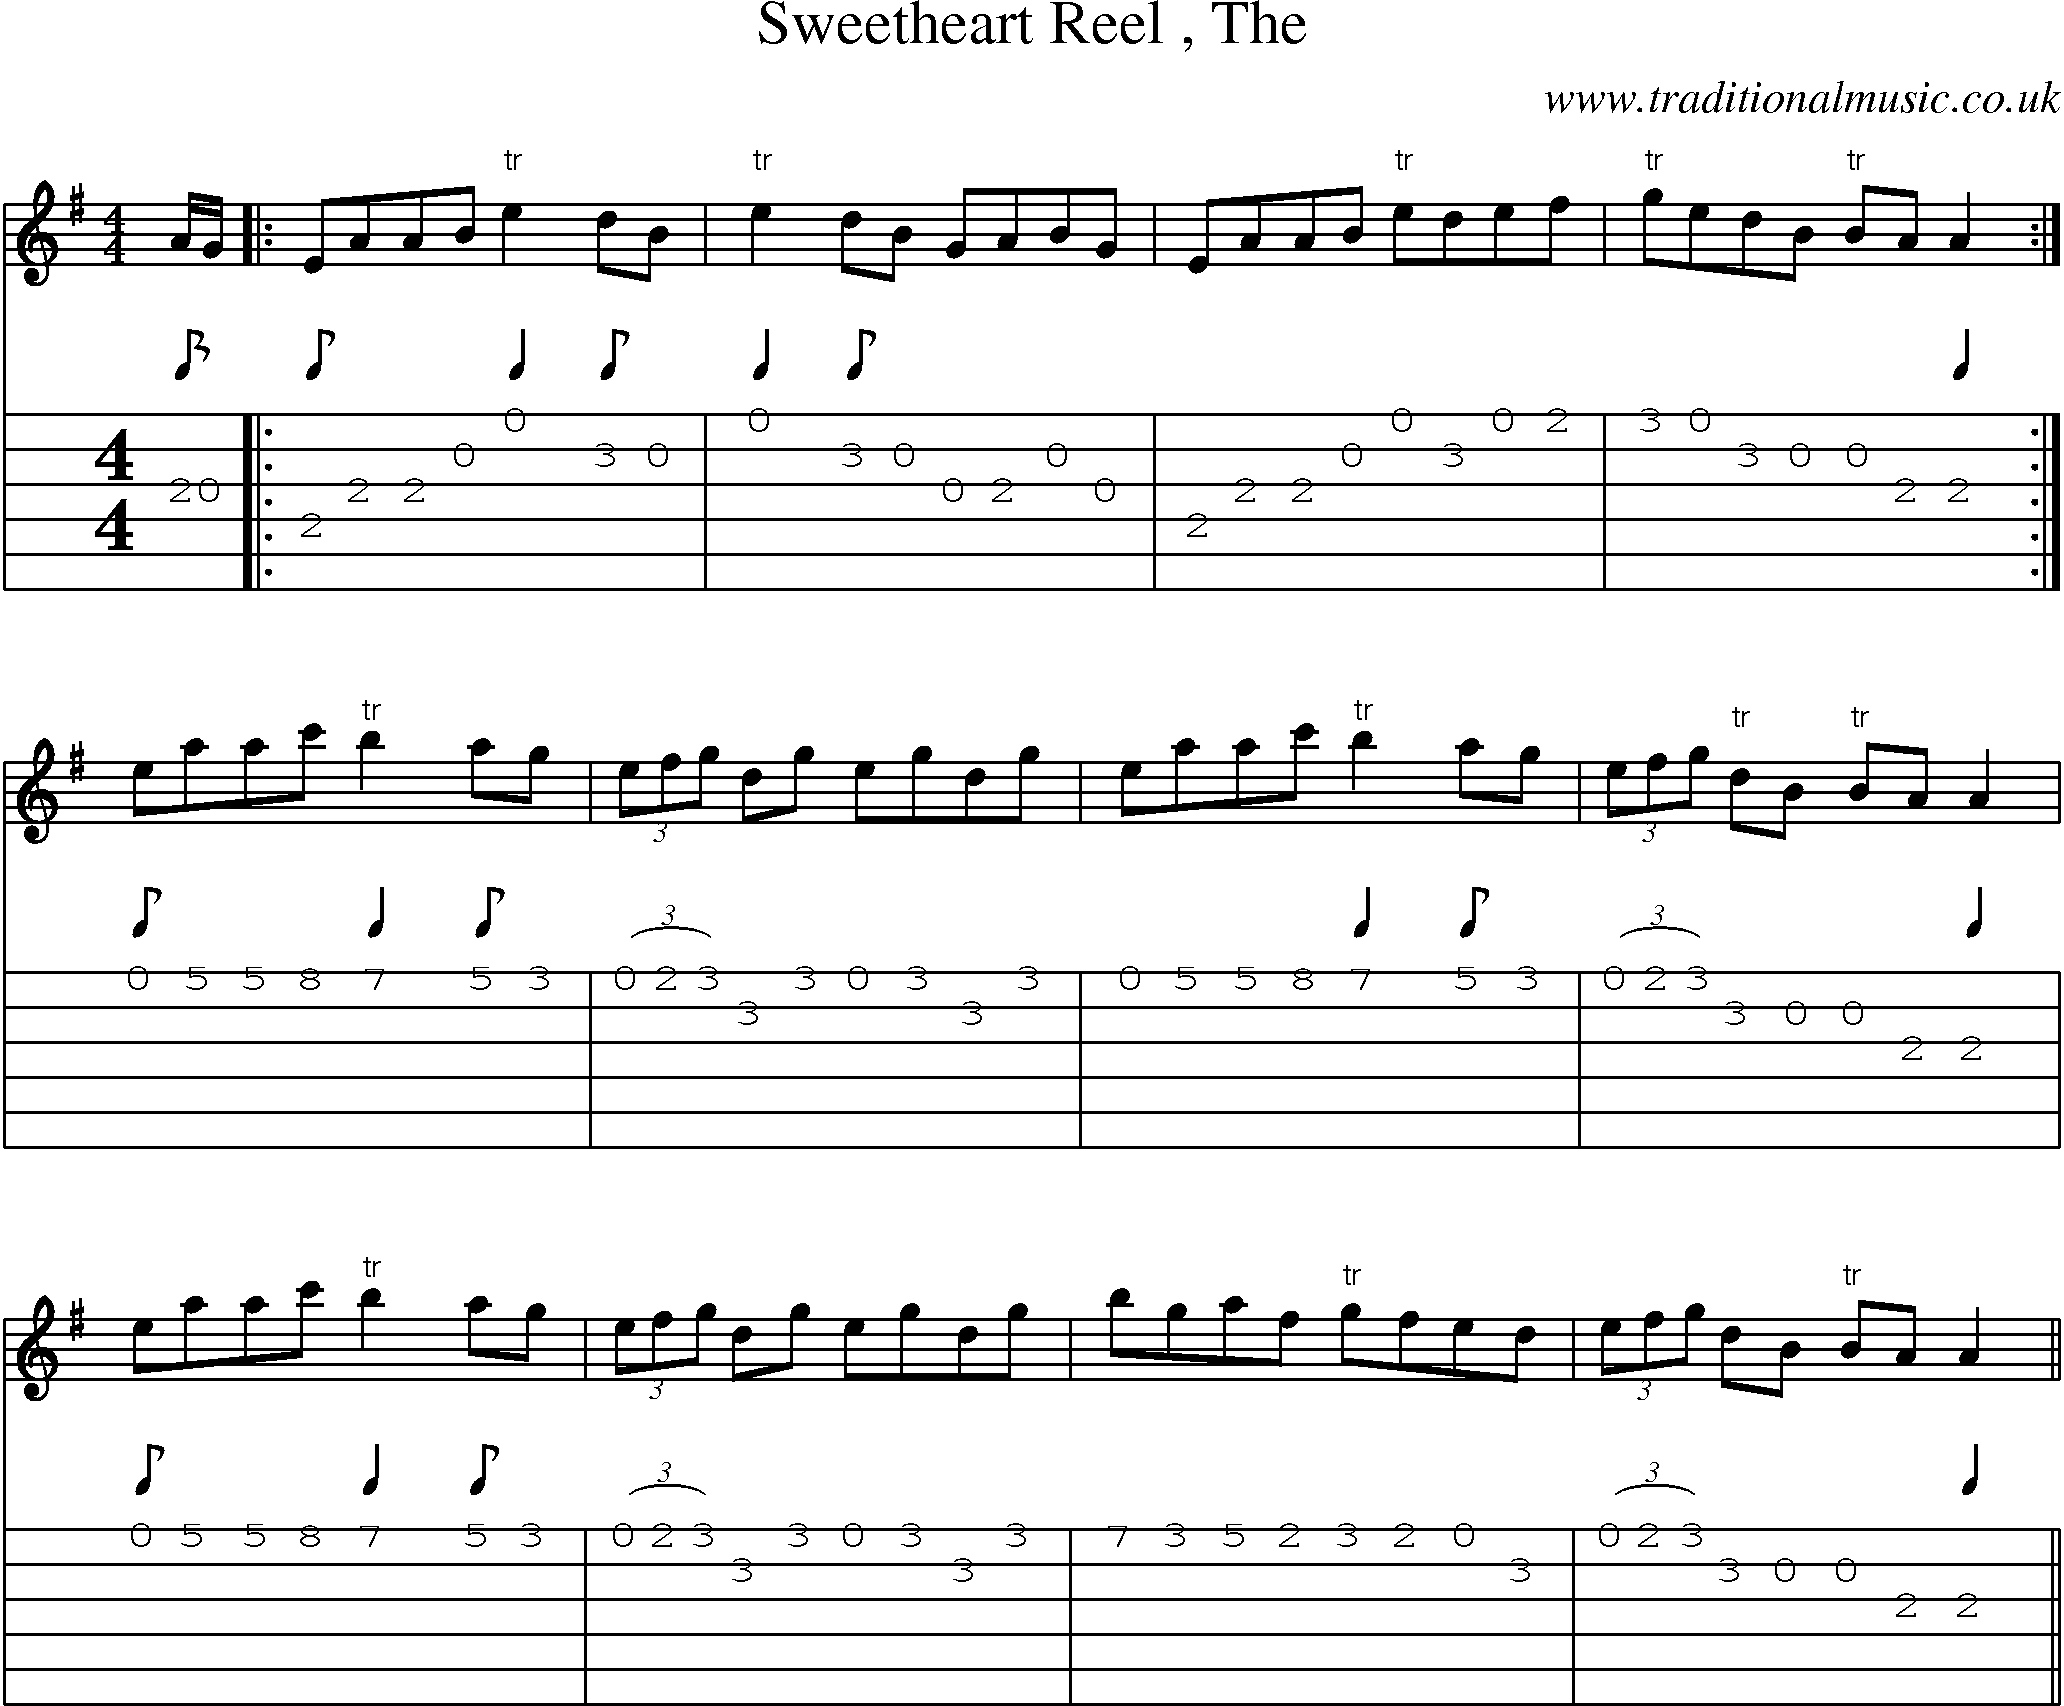 Music Score and Guitar Tabs for Sweetheart Reel